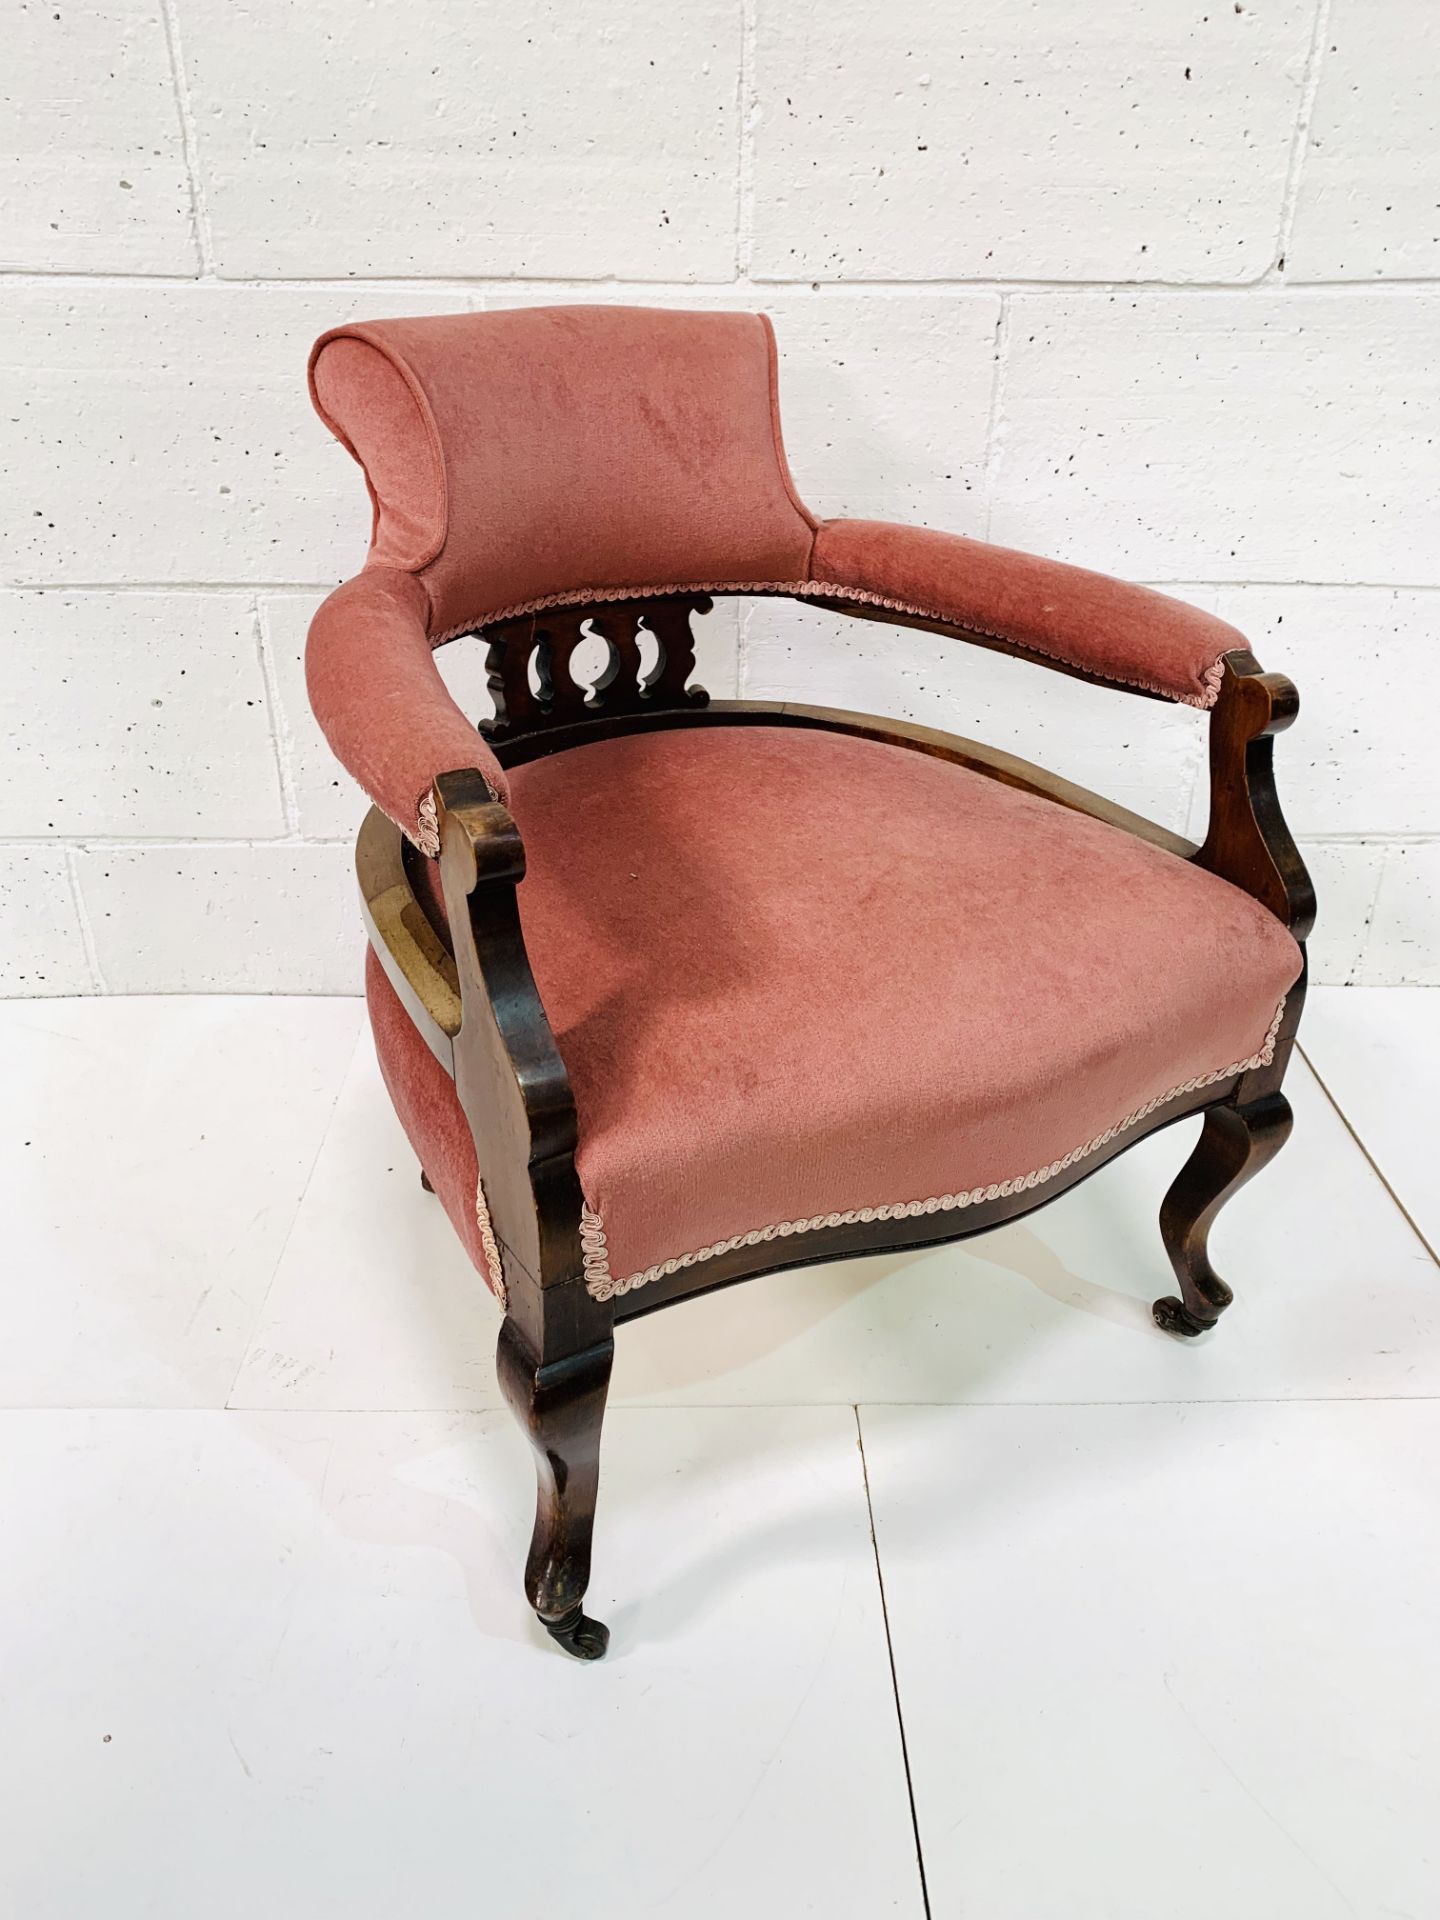 Mahogany pink velvet upholstered open arm chair with shaped legs.